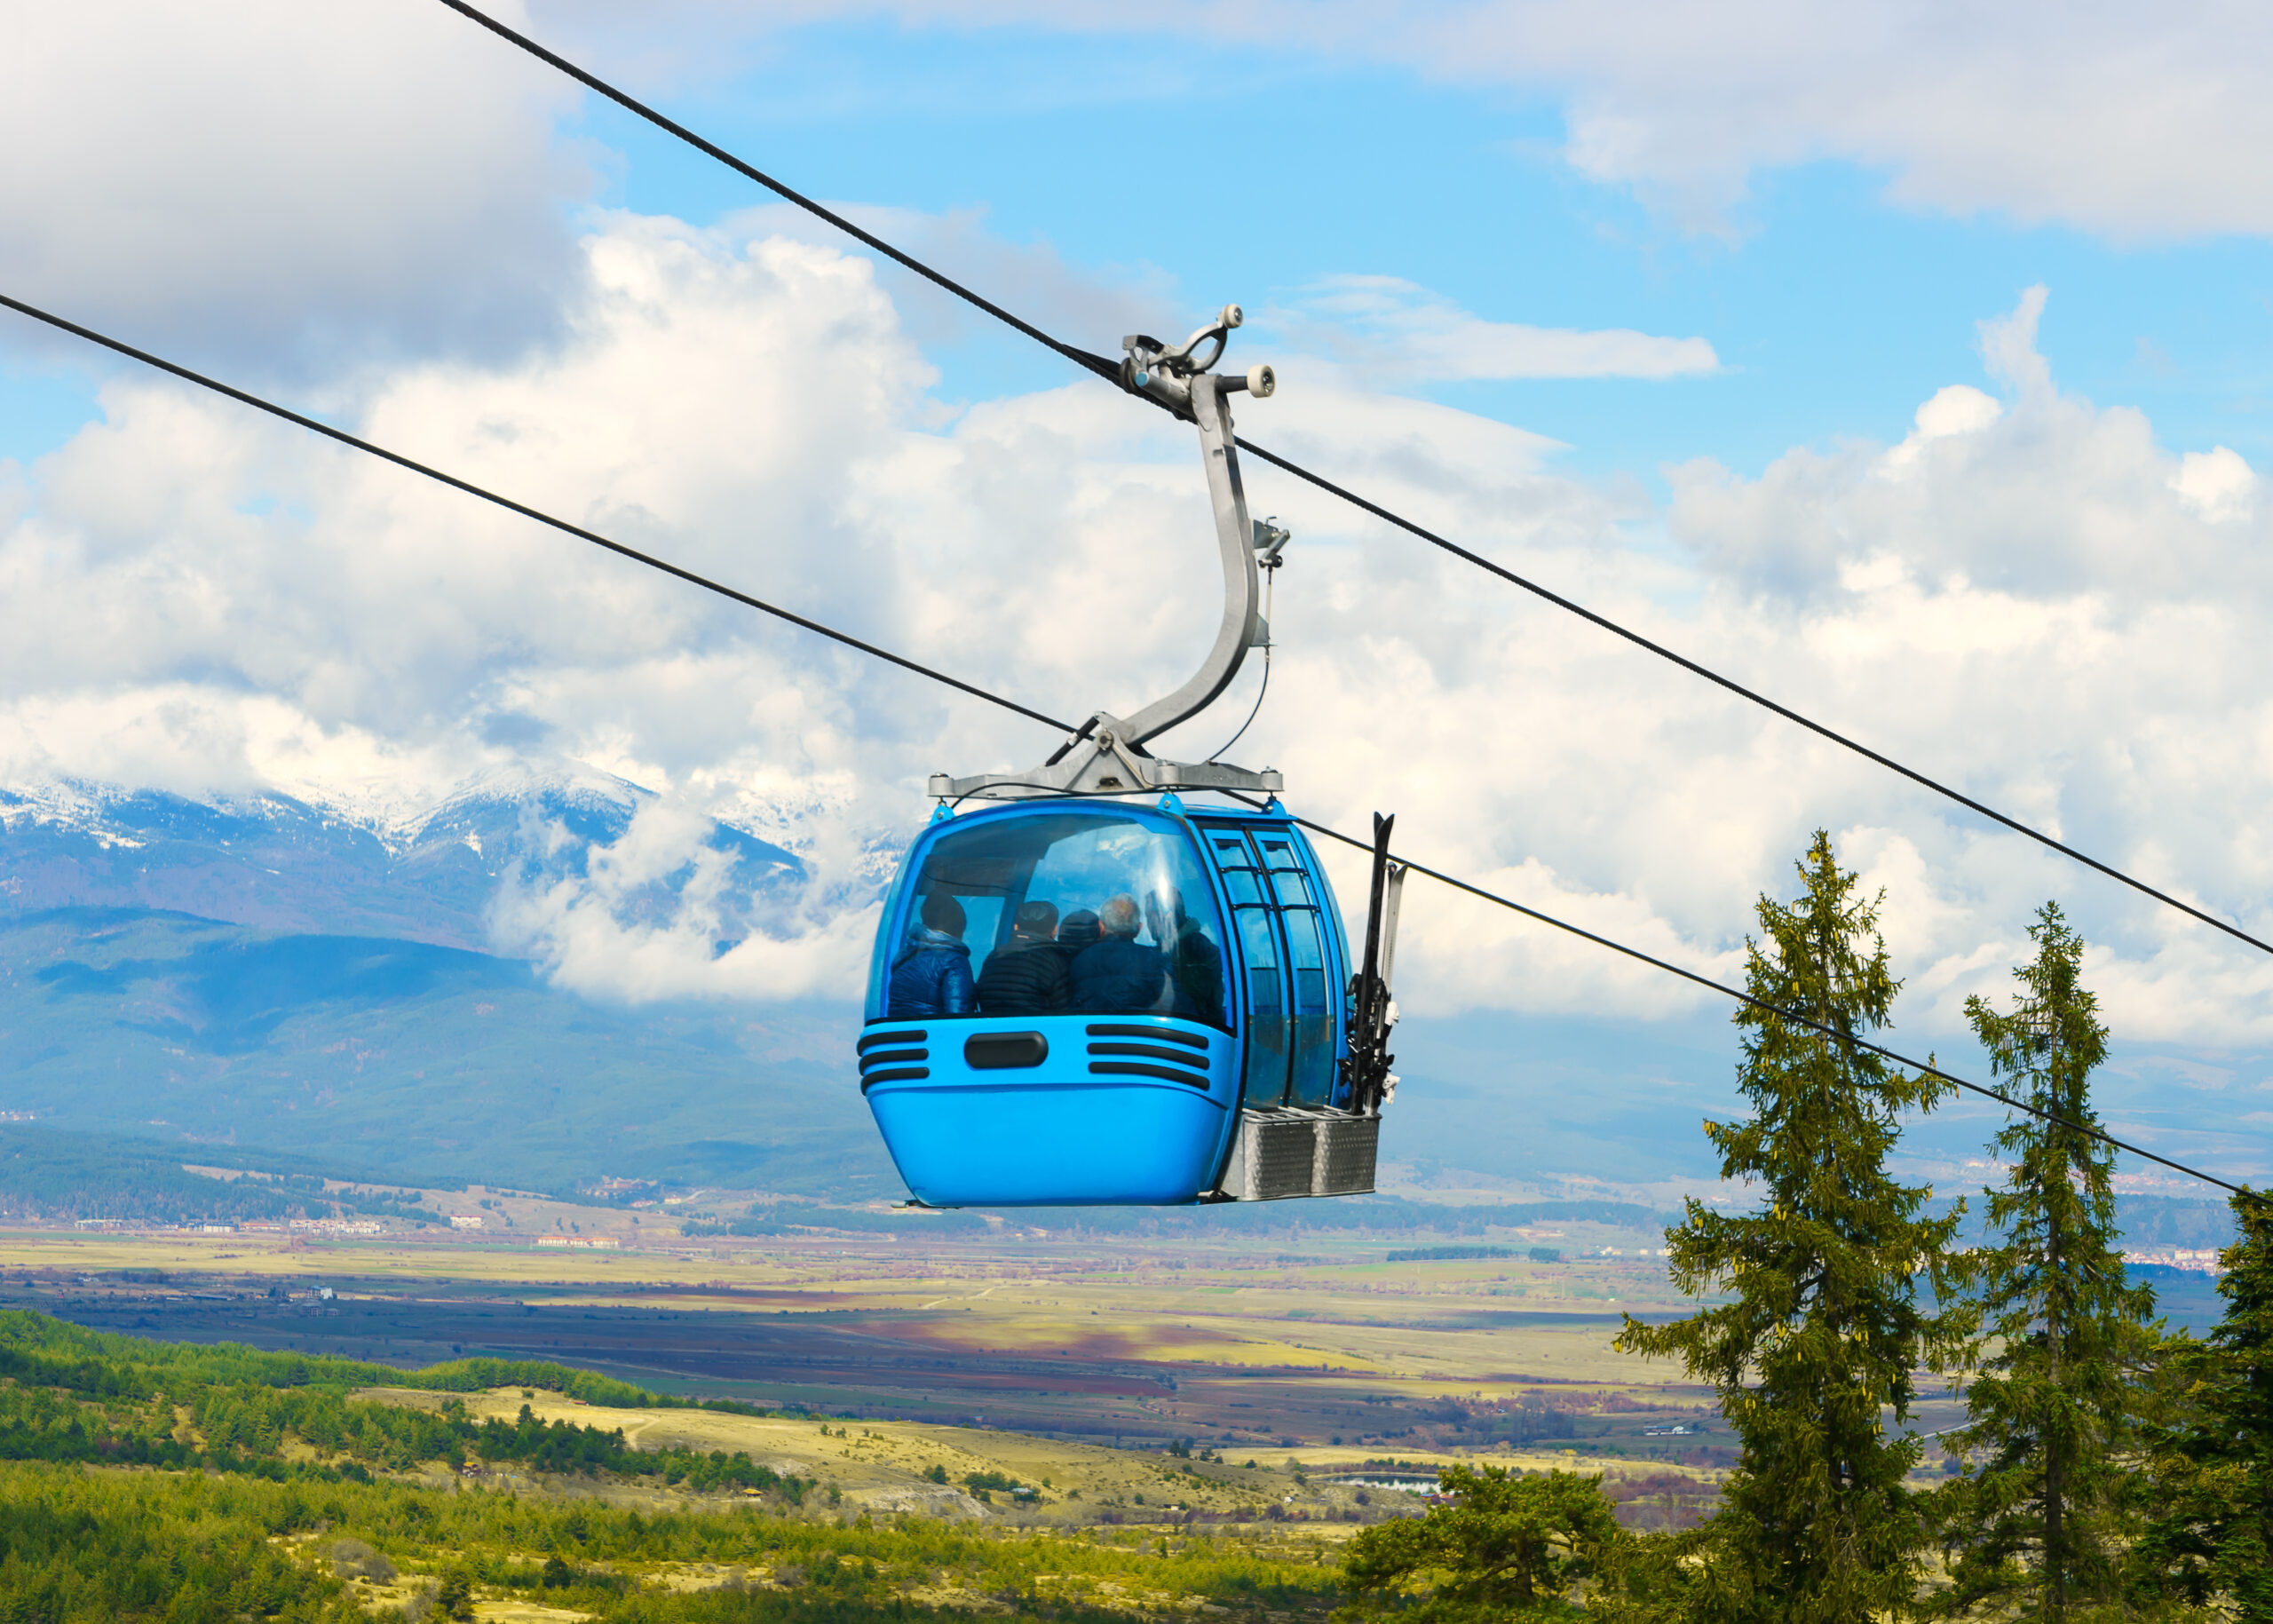 Mountain landscape in a ski resort with a cable car to the mountains.